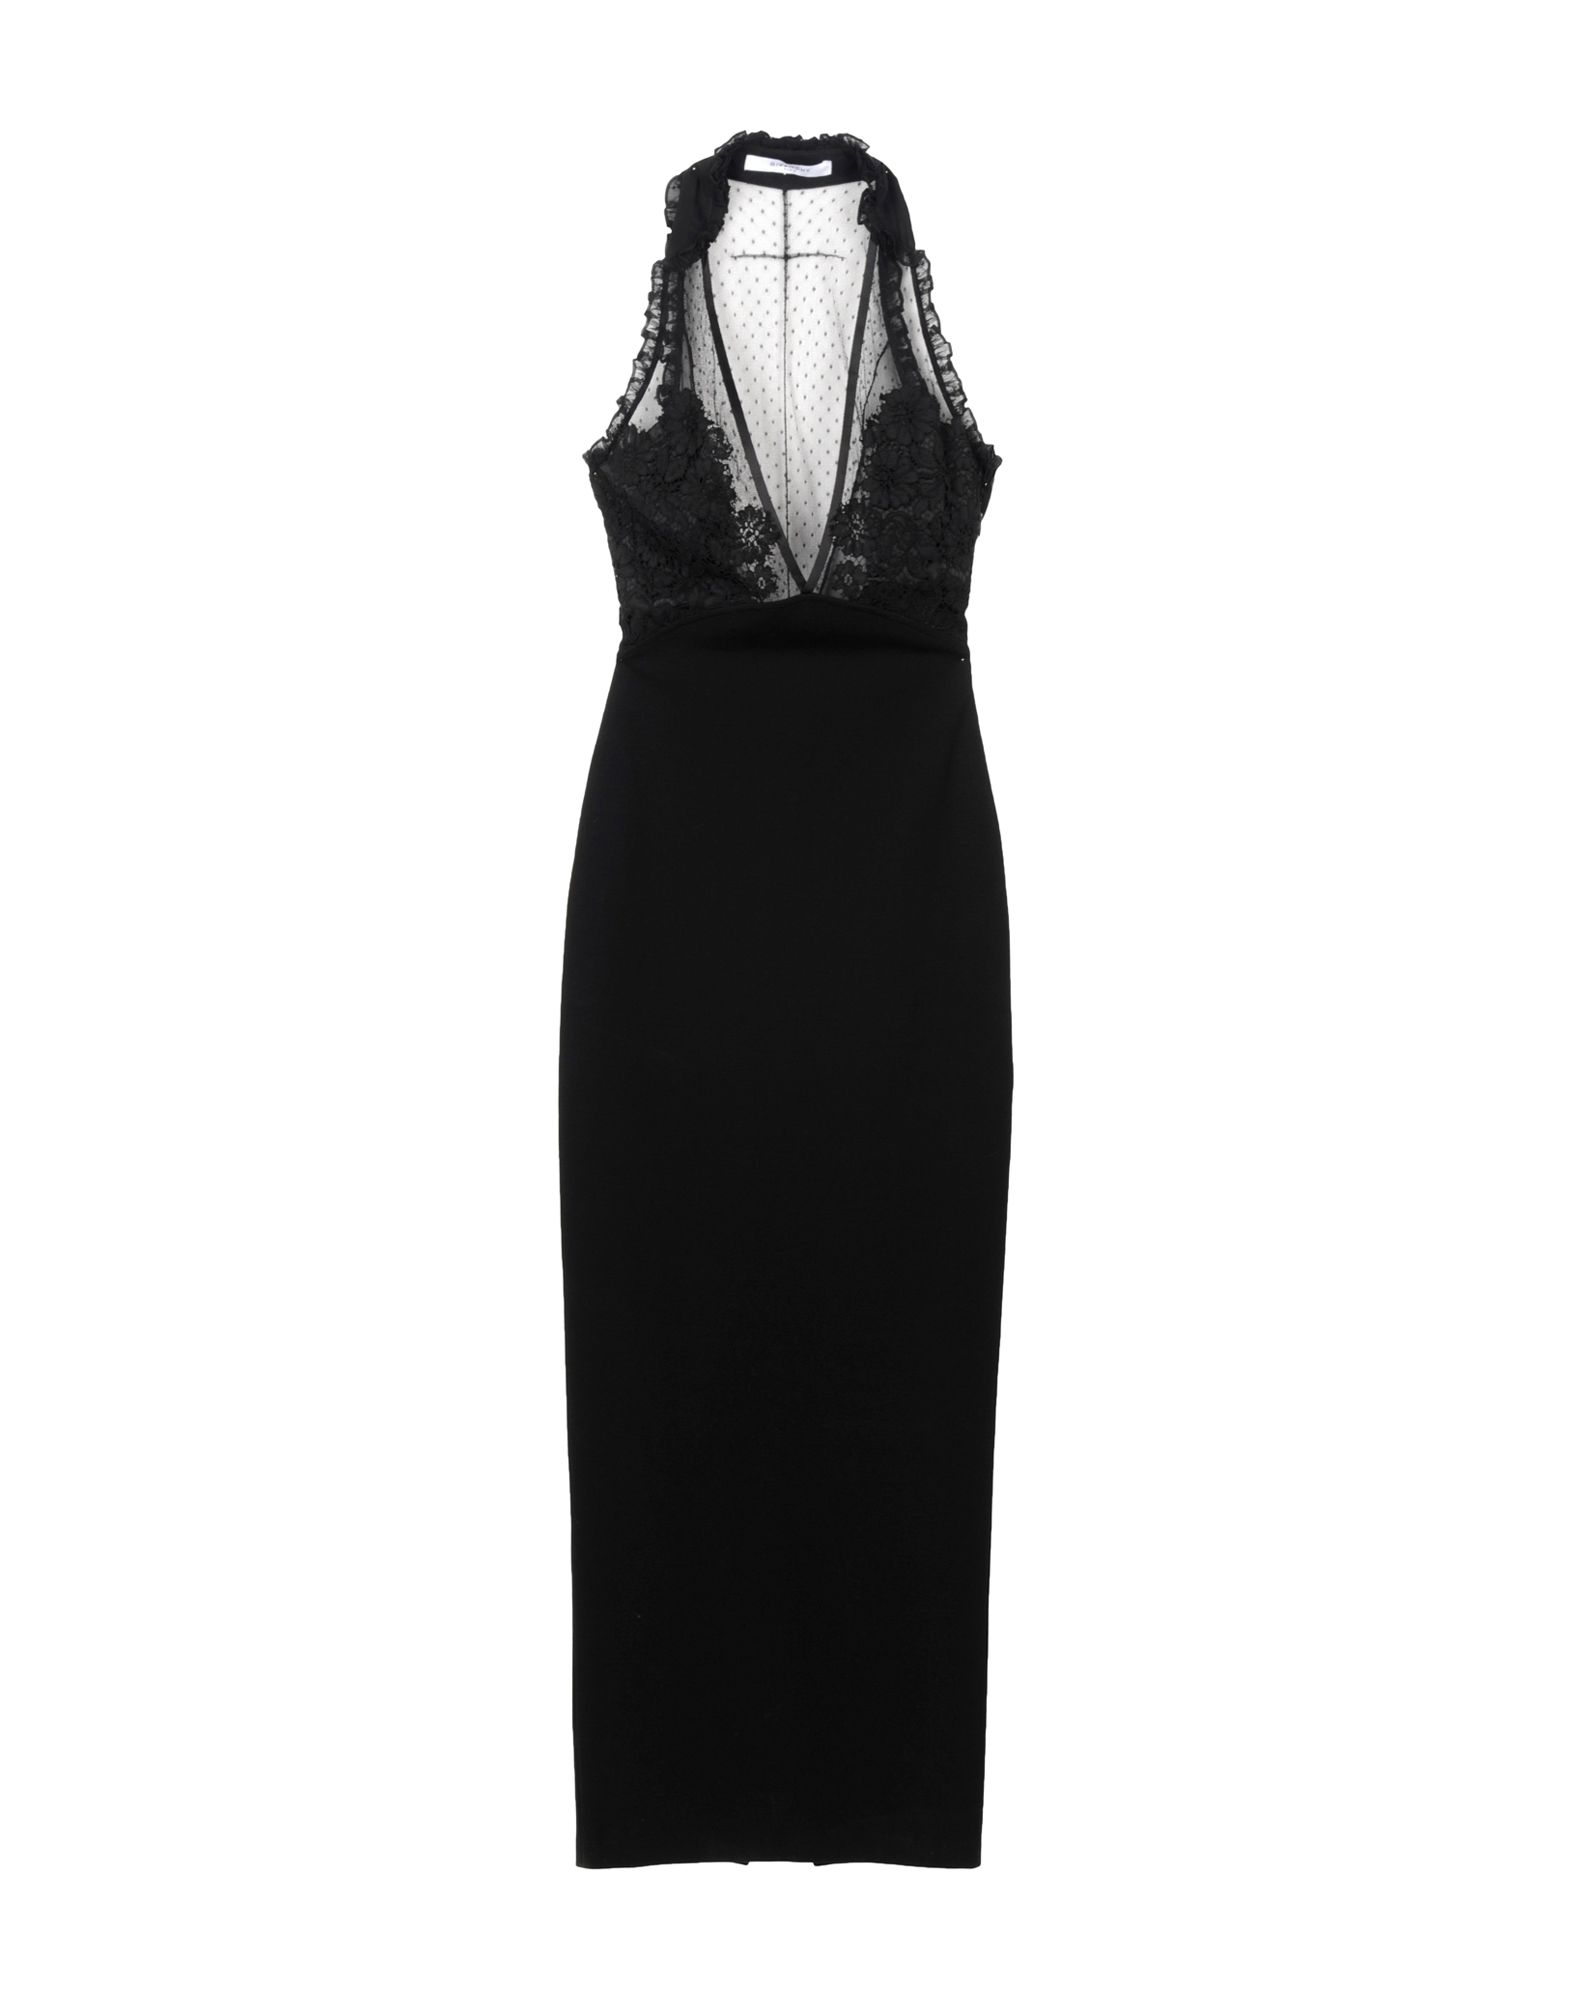 GIVENCHY LONG DRESSES,34754450NW 3